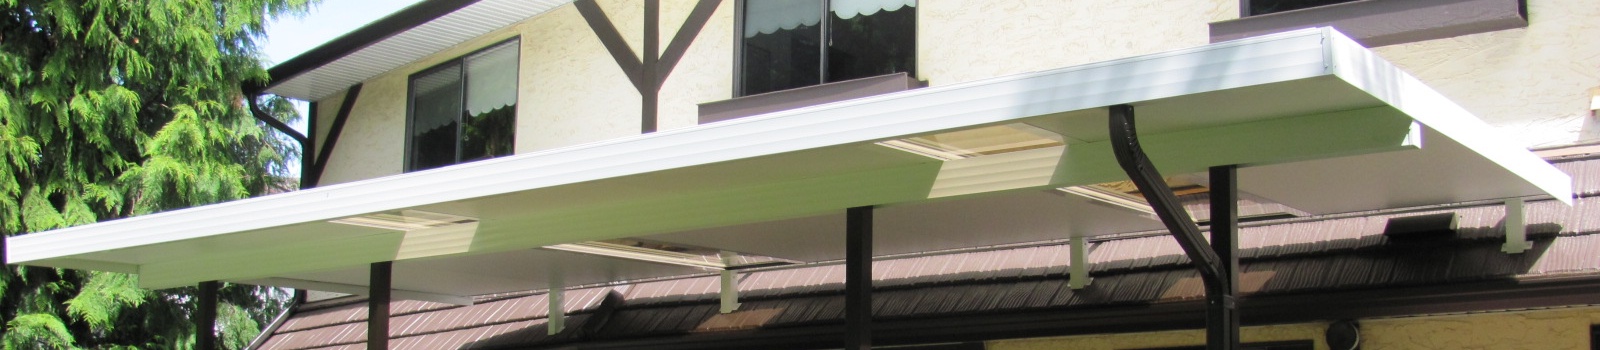 Nanaimo Awnings Canopies Find Awnings Canopies In Nanaimo Bc Canpages Page 1